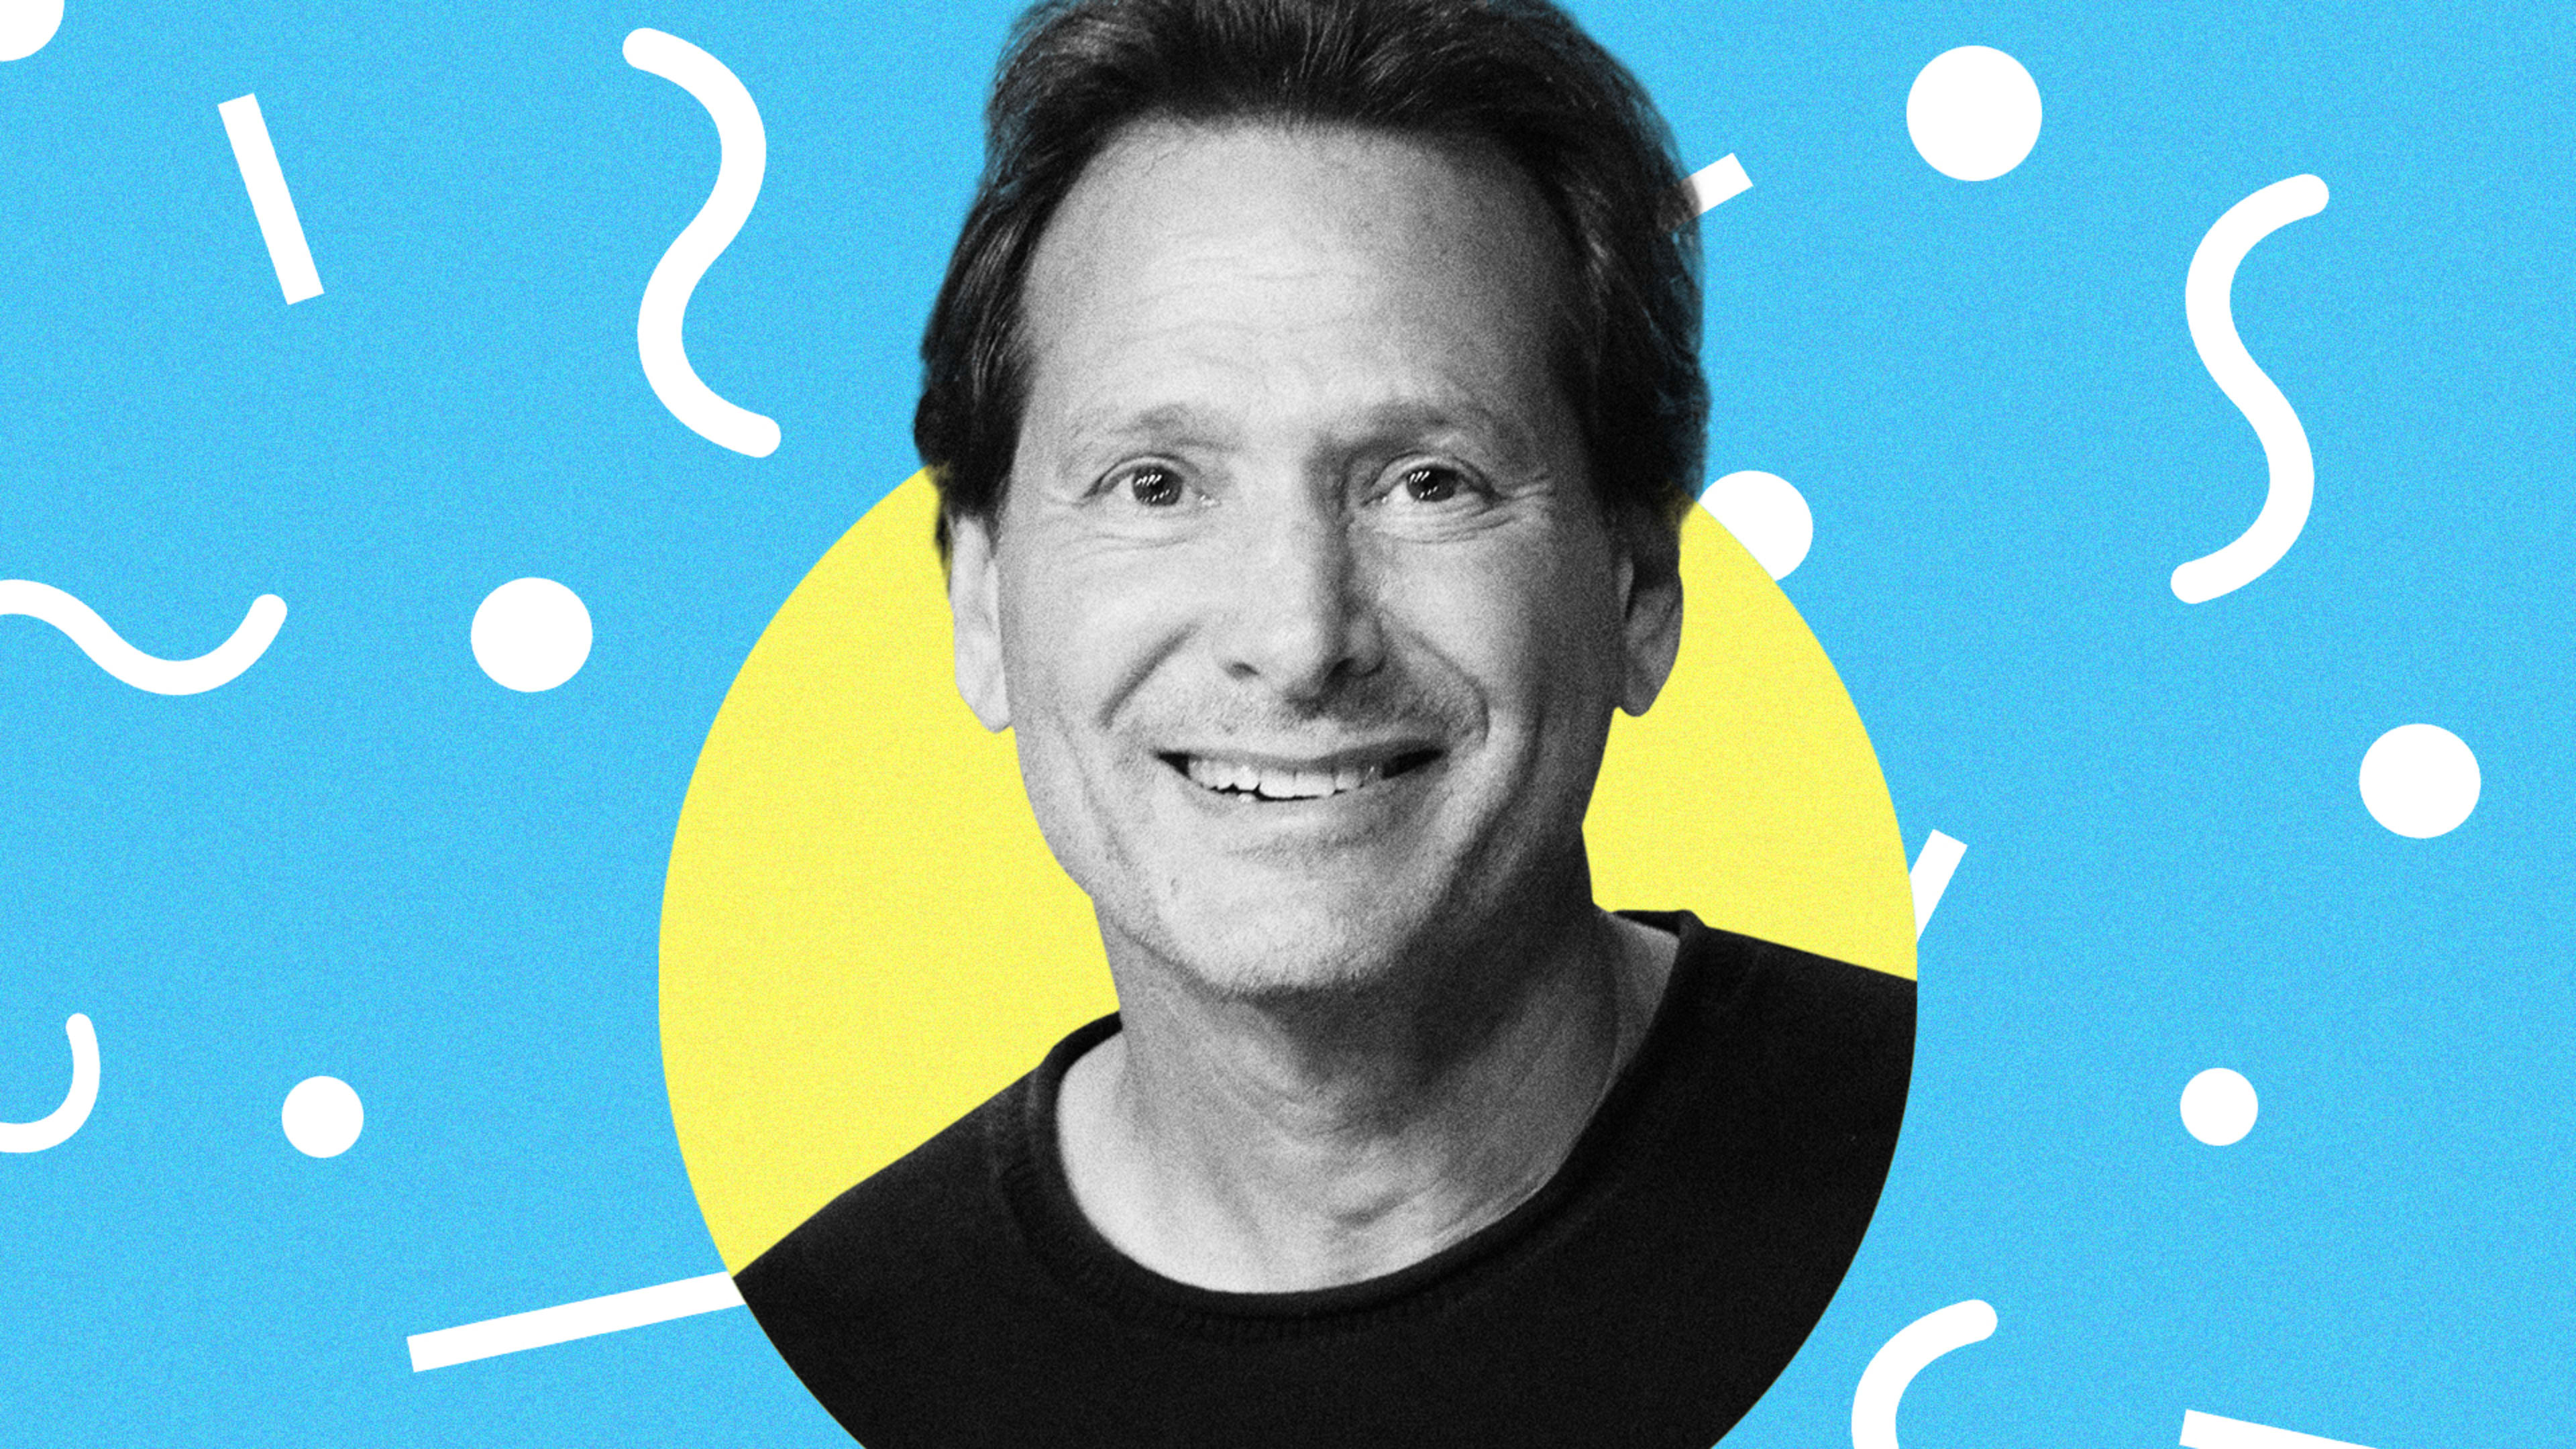 Webinar: Turning values into actions with PayPal CEO Dan Schulman